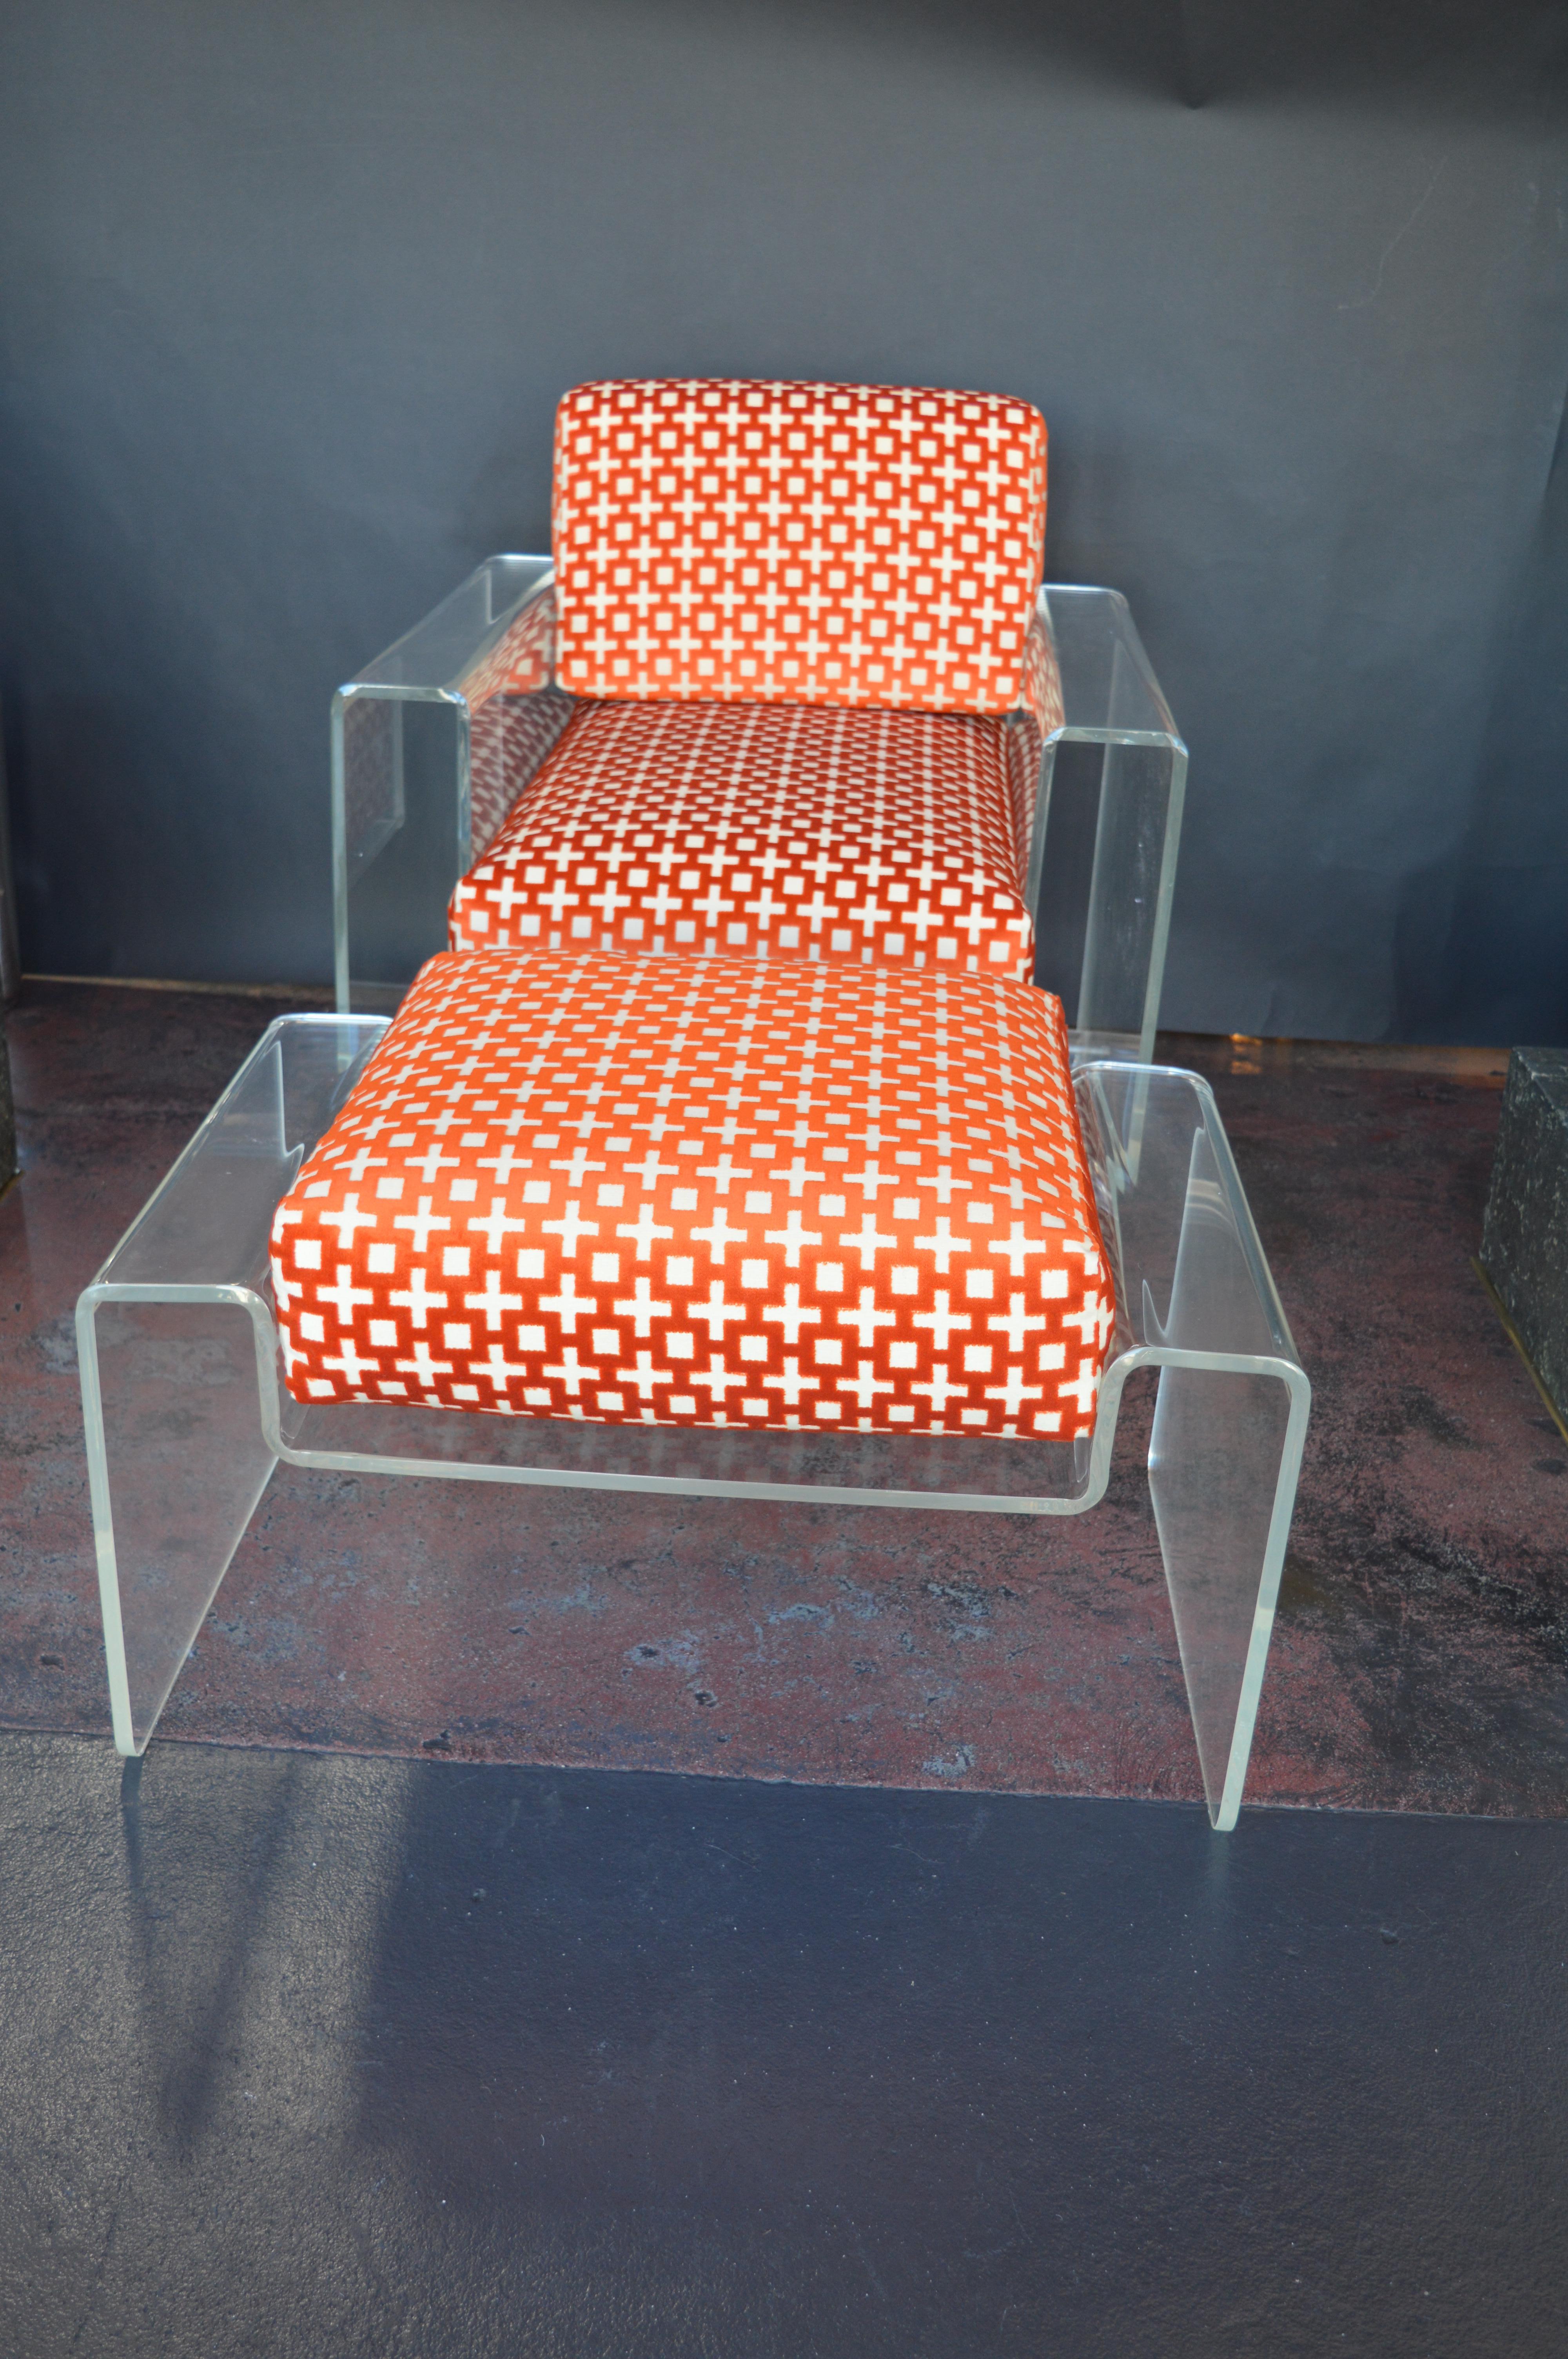 Mid-Century Modern Lucite armchair with matching Lucite ottoman.
Ottoman measures: 18 inches H x 30.25 inches W x 20.